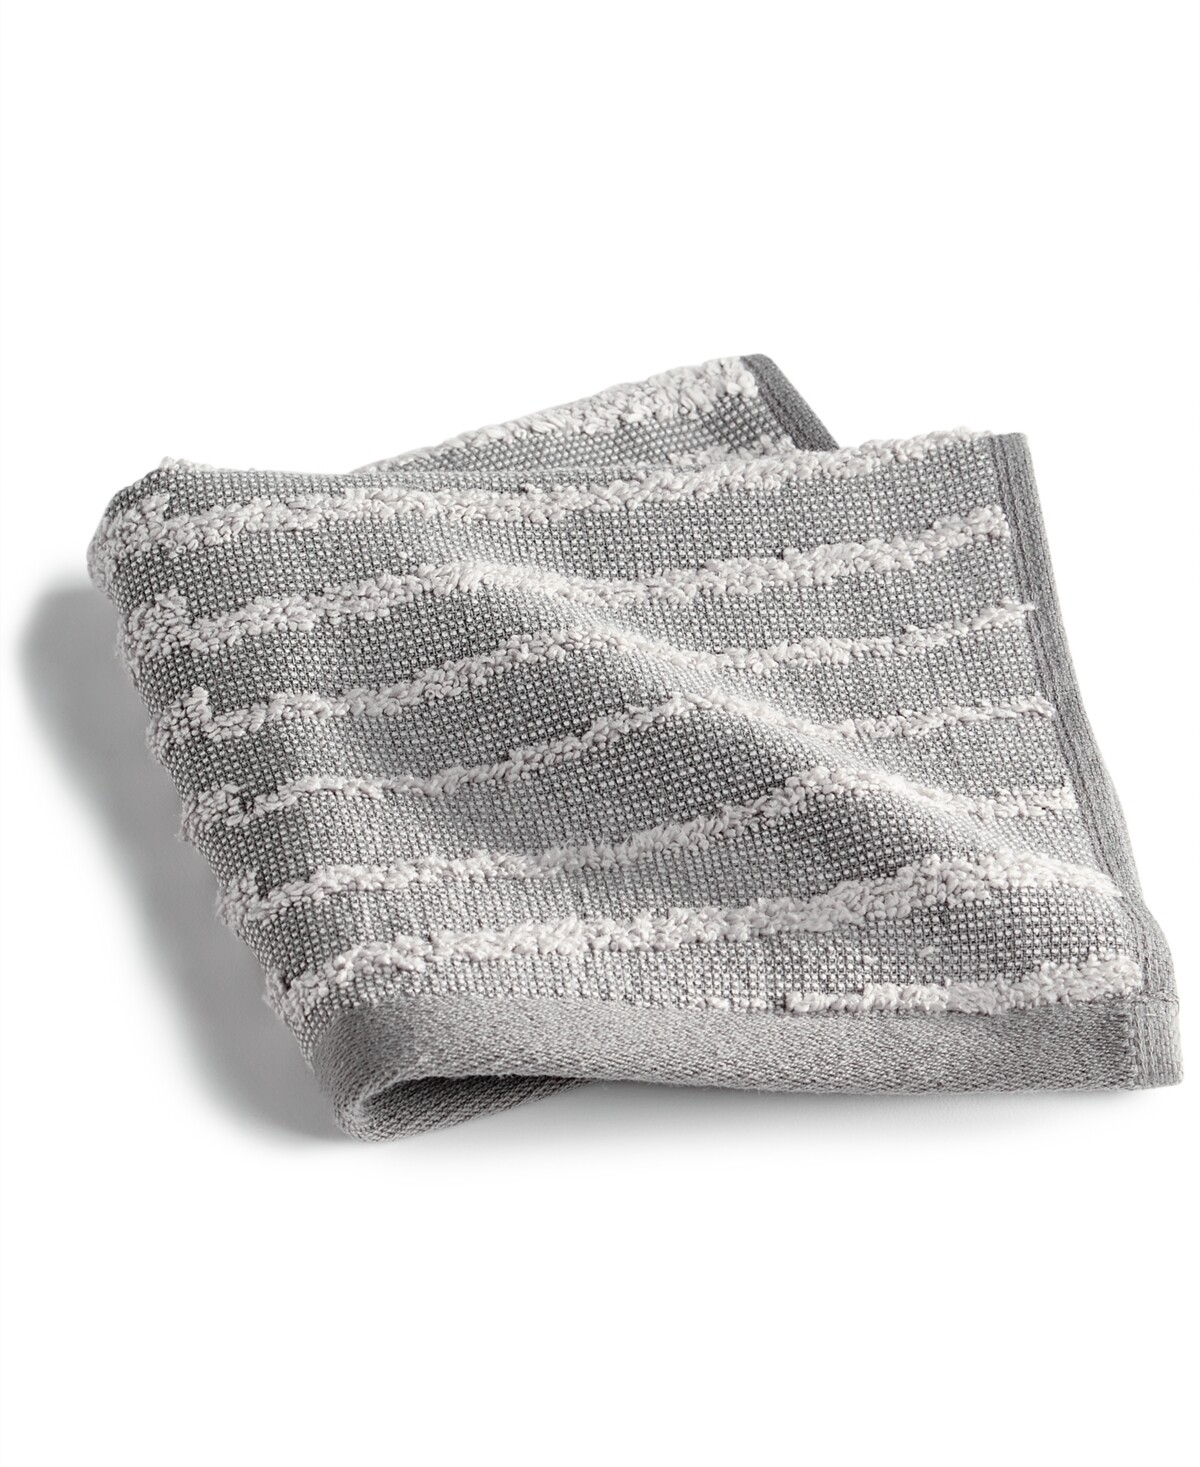 Hotel Collection Micro Cotton Channels Wash Towel, Vapor Combo